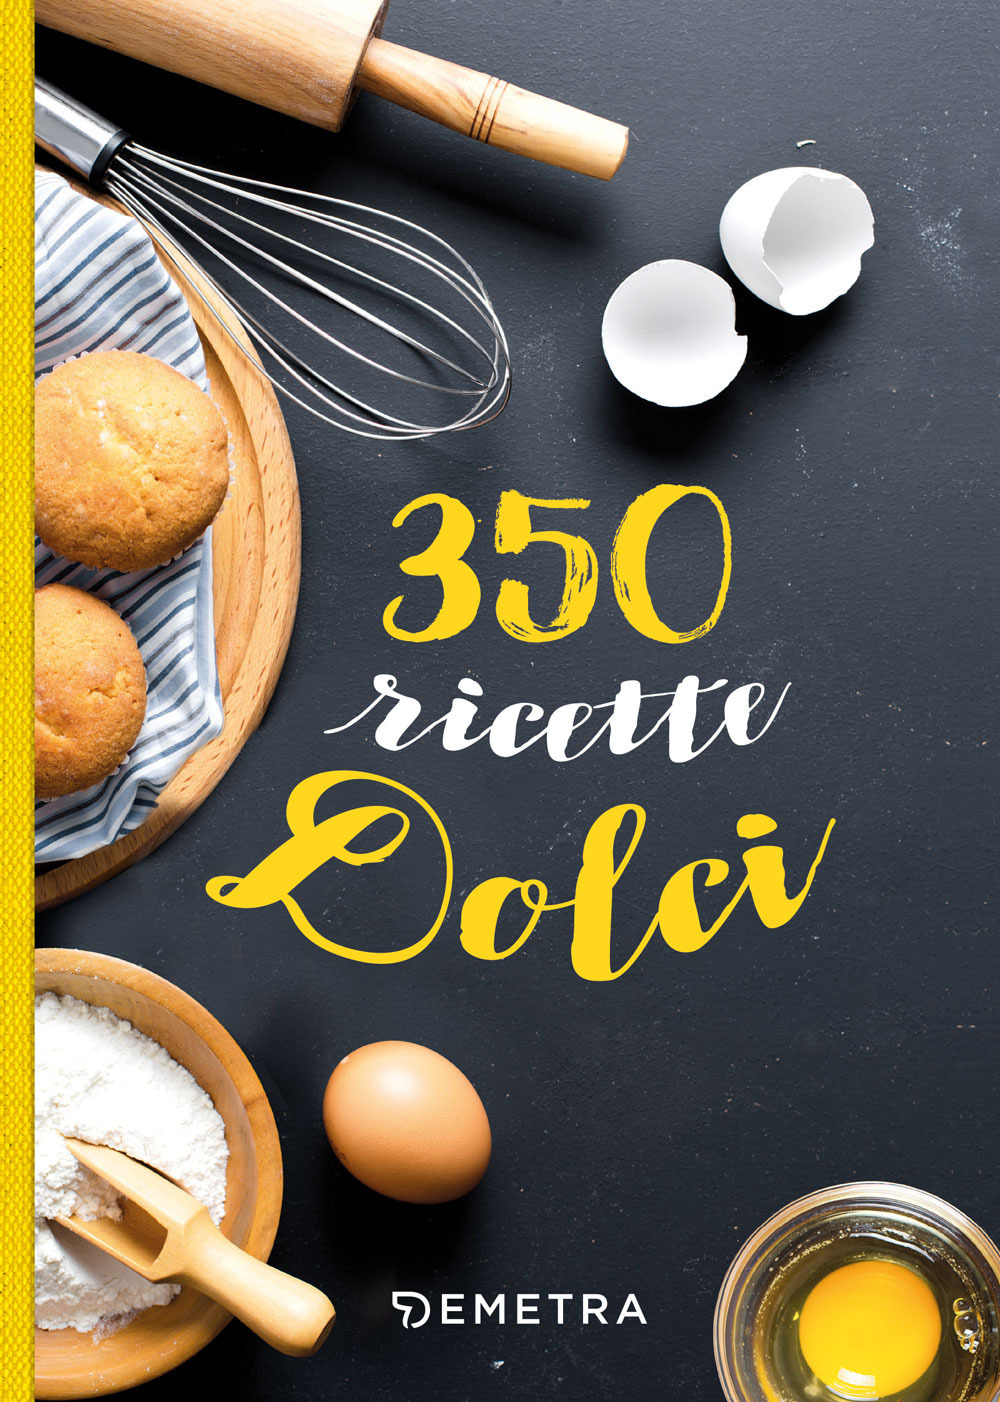 Image of 350 ricette dolci